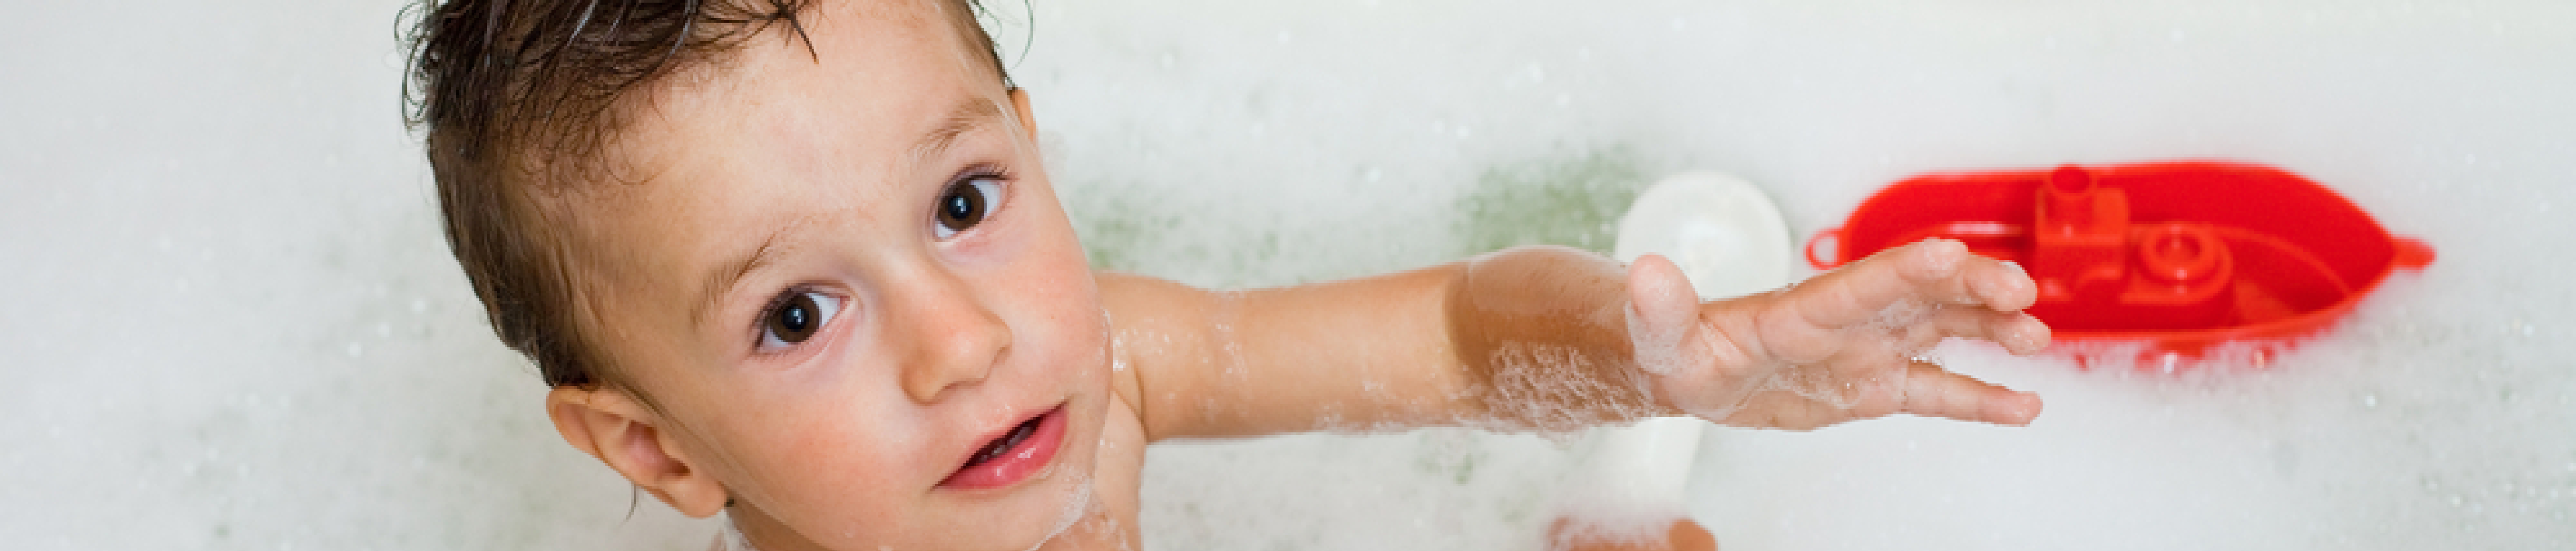 Does your child need to bathe every day? - Harvard Health